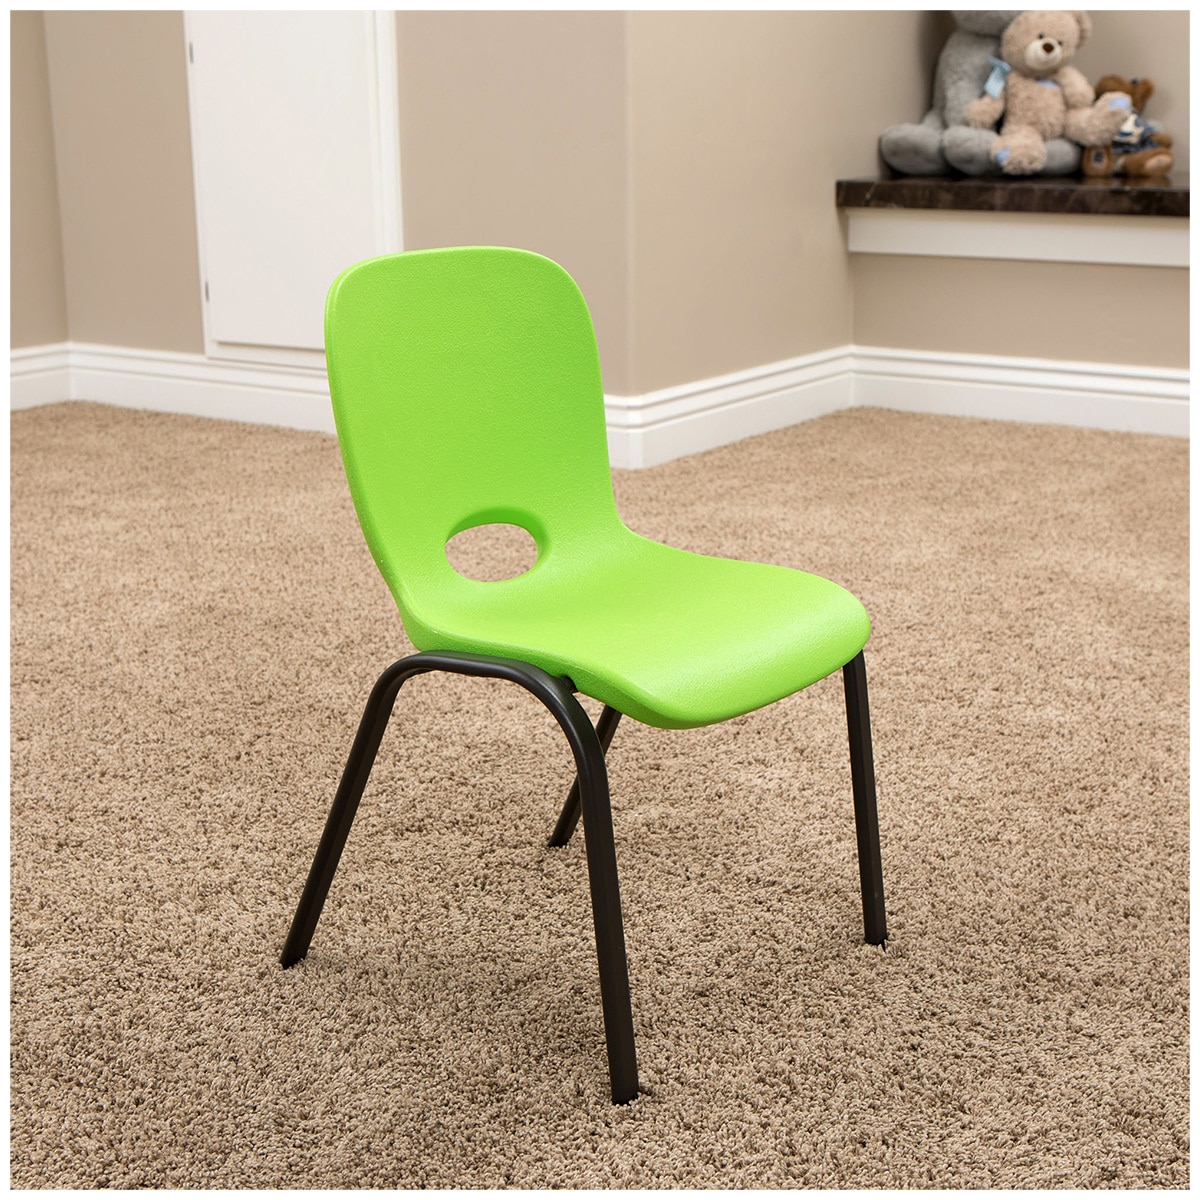 Lifetime Kids Stacking Chairs - Lime Green